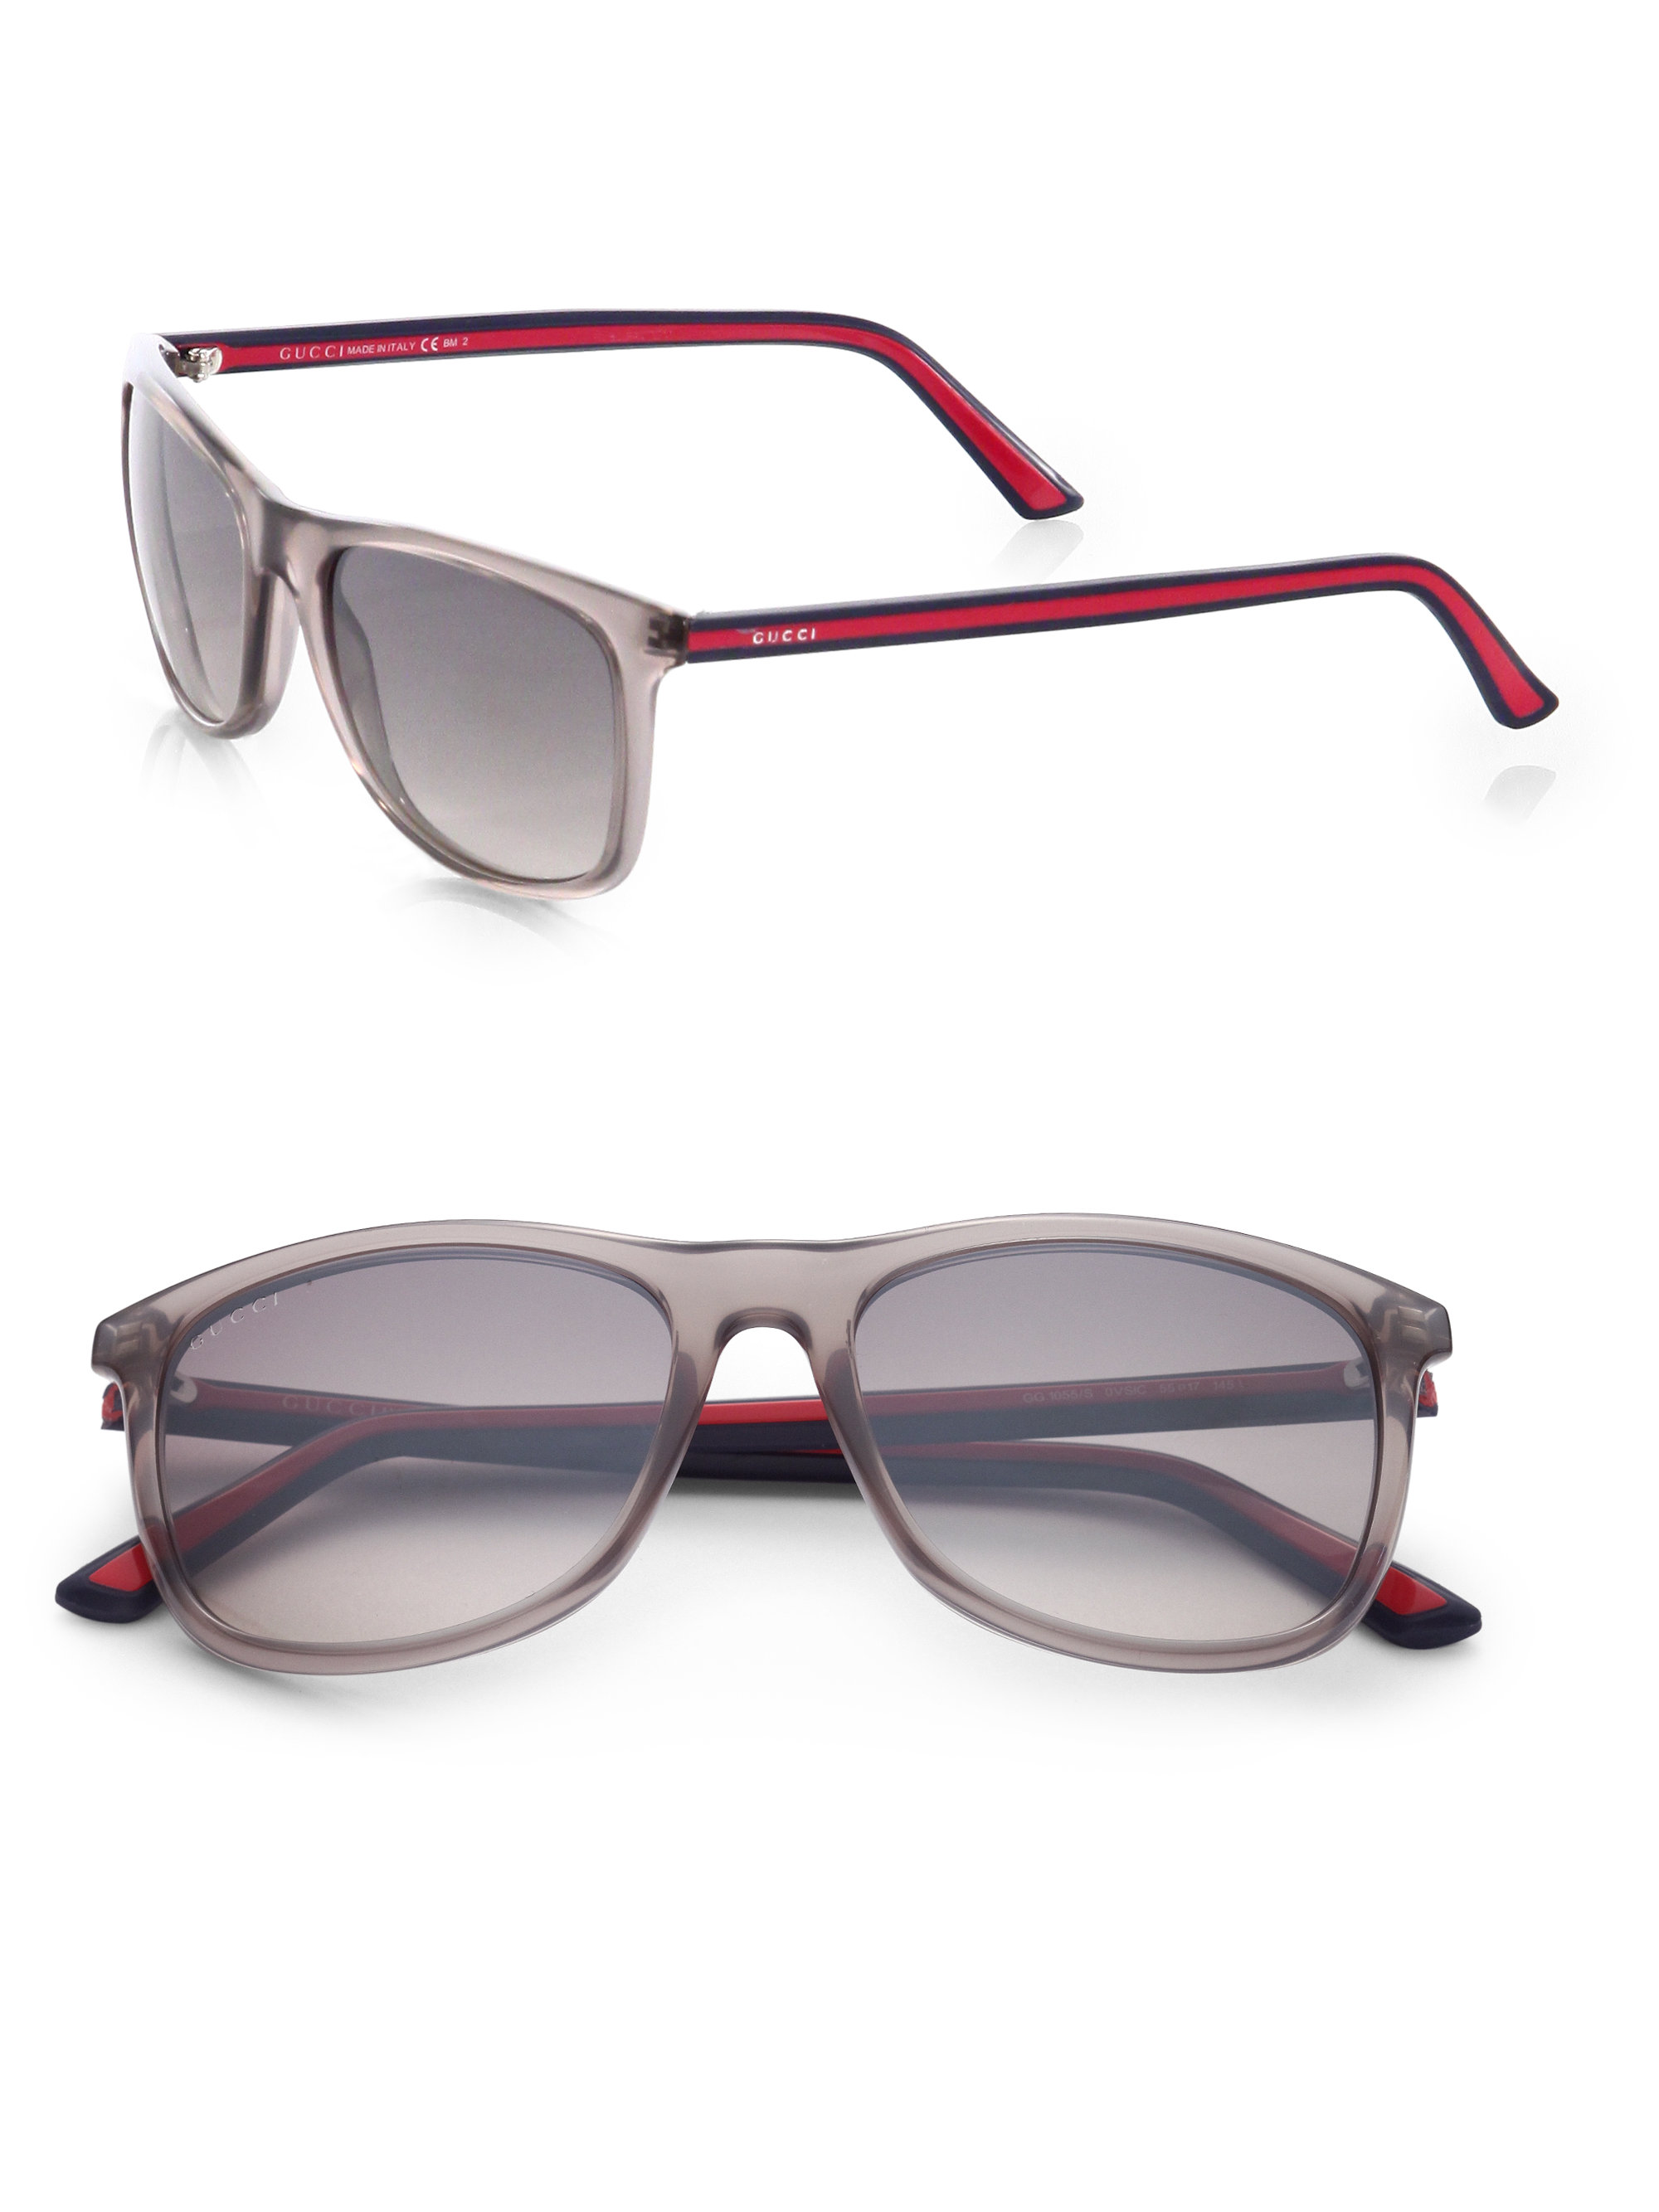 Lyst - Gucci Injected Propionate Two-two Wayfarer Sunglasses in Gray ...